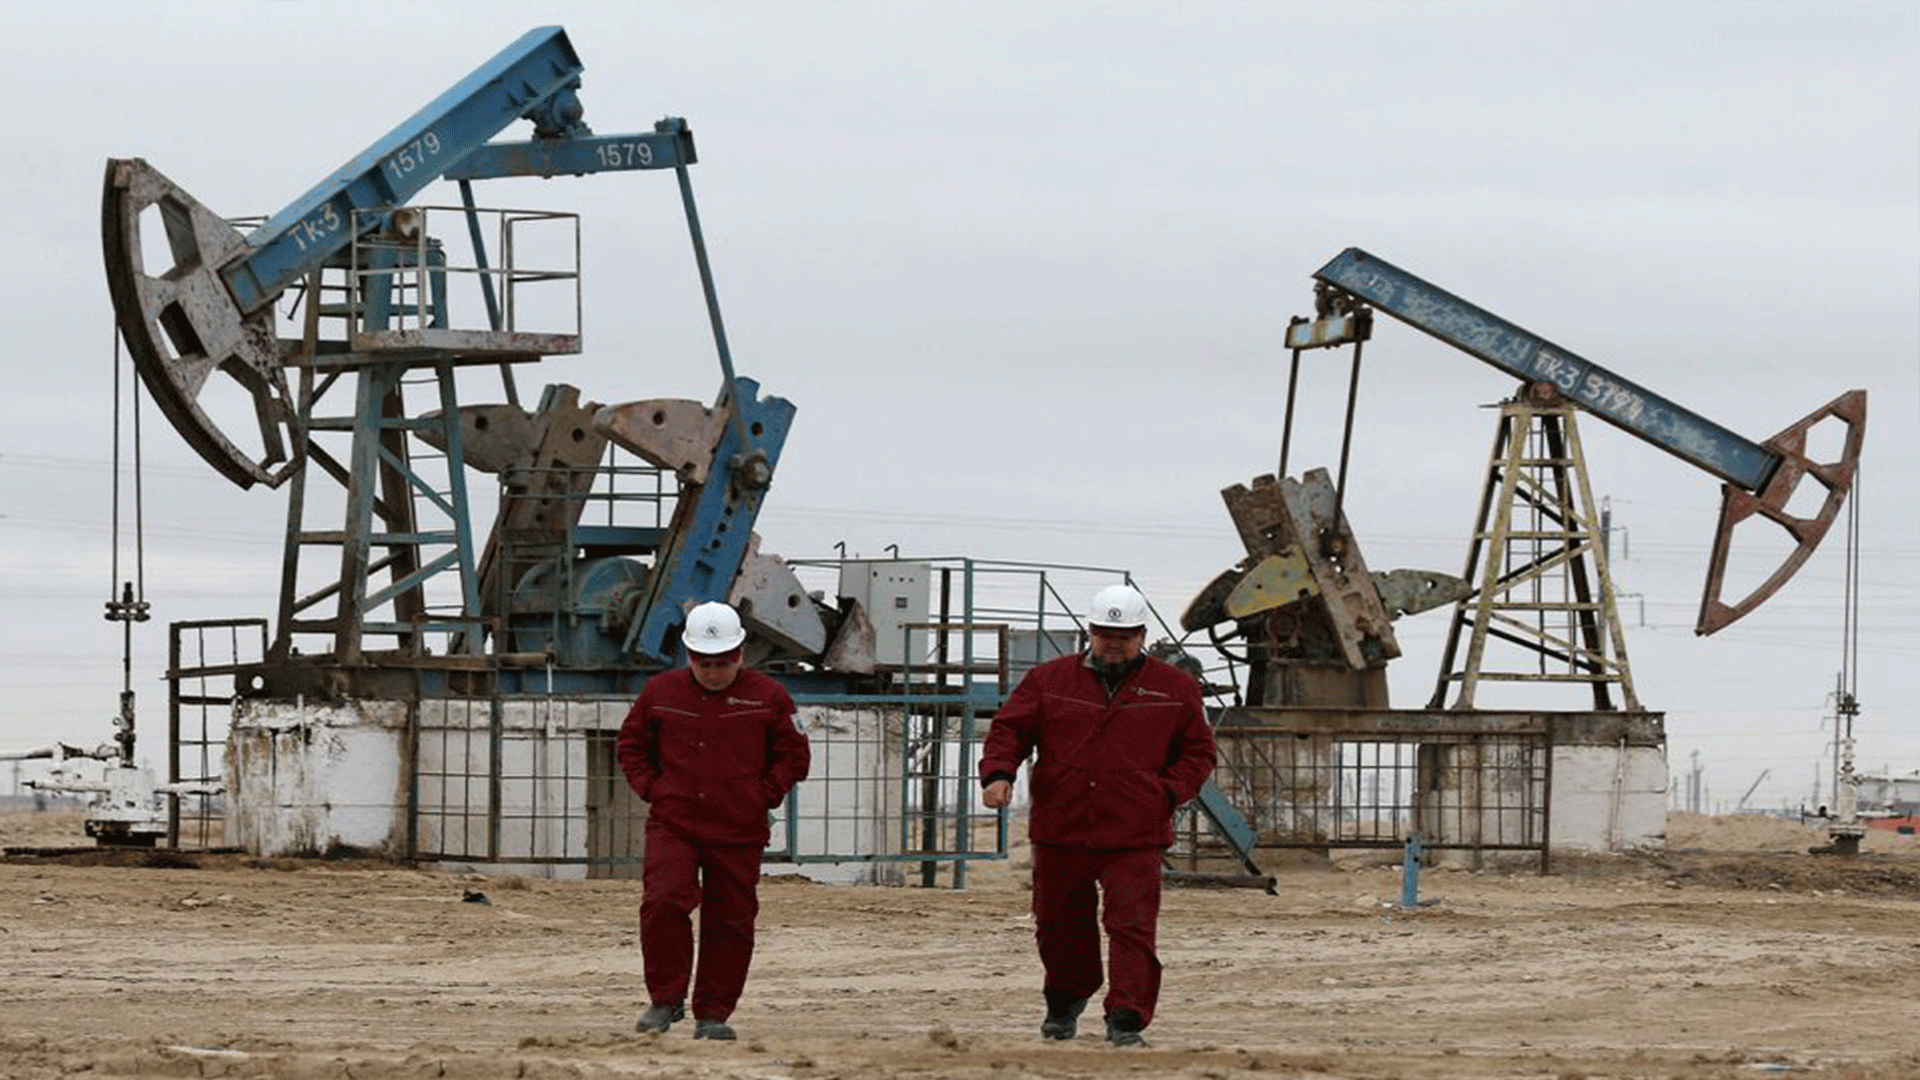  Workers walk as oil pumps are seen in the background in the Uzen oil and gas field in the Mangistau Region of Kazakhstan November 13, 2021. REUTERS/Pavel Mikheyev